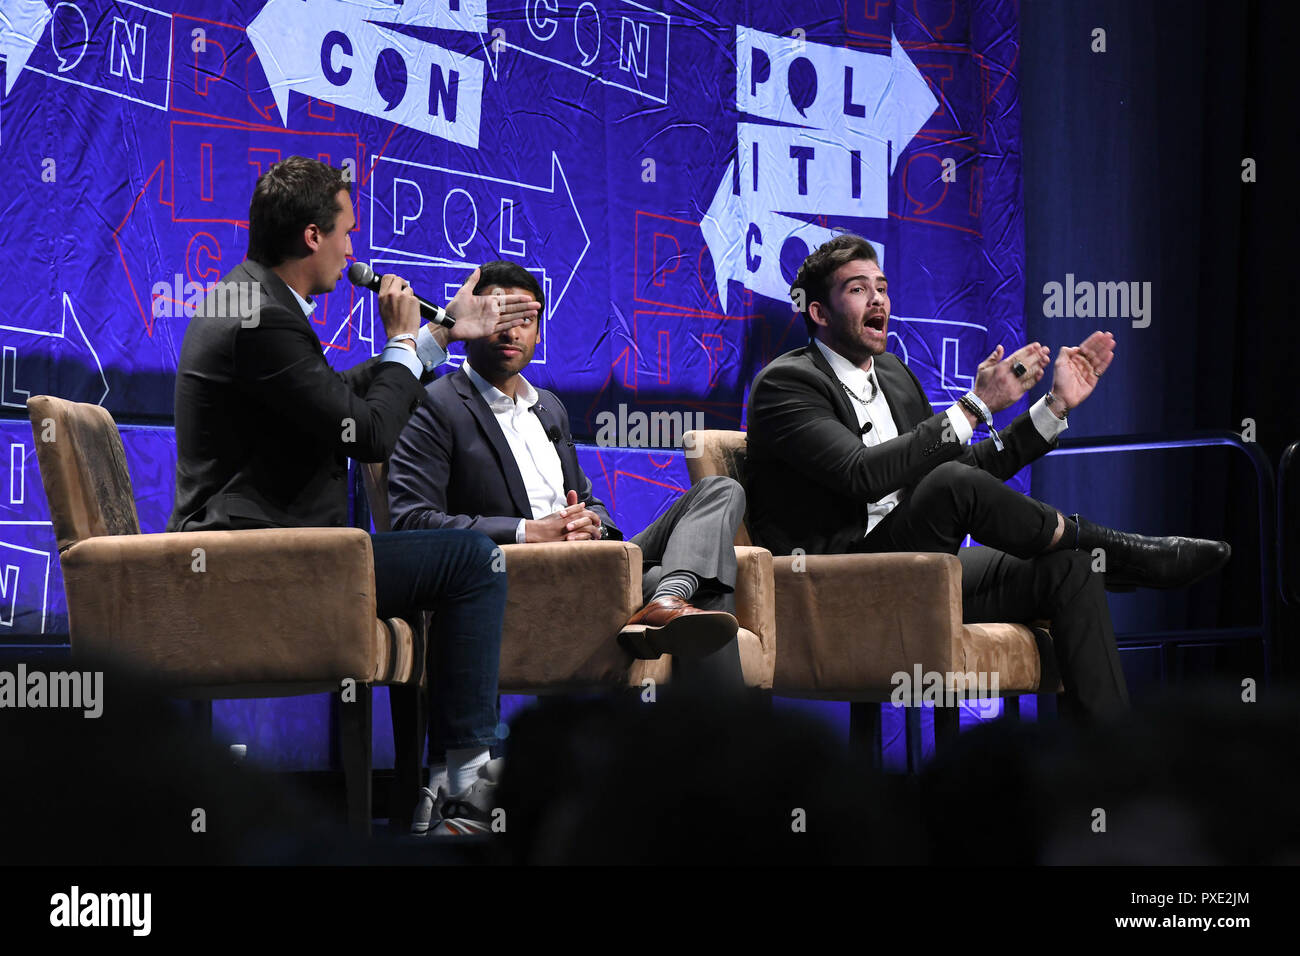 Los Angeles, USA. 20th Oct, 2018. (L-R) Charlie Kirk, Steven Olikara, and Hasan Piker speak onstage at attends Politicon 2018 at the LA convention Center on October 20, 2018 in Los Angeles, California. Credit: The Photo Access/Alamy Live News Stock Photo